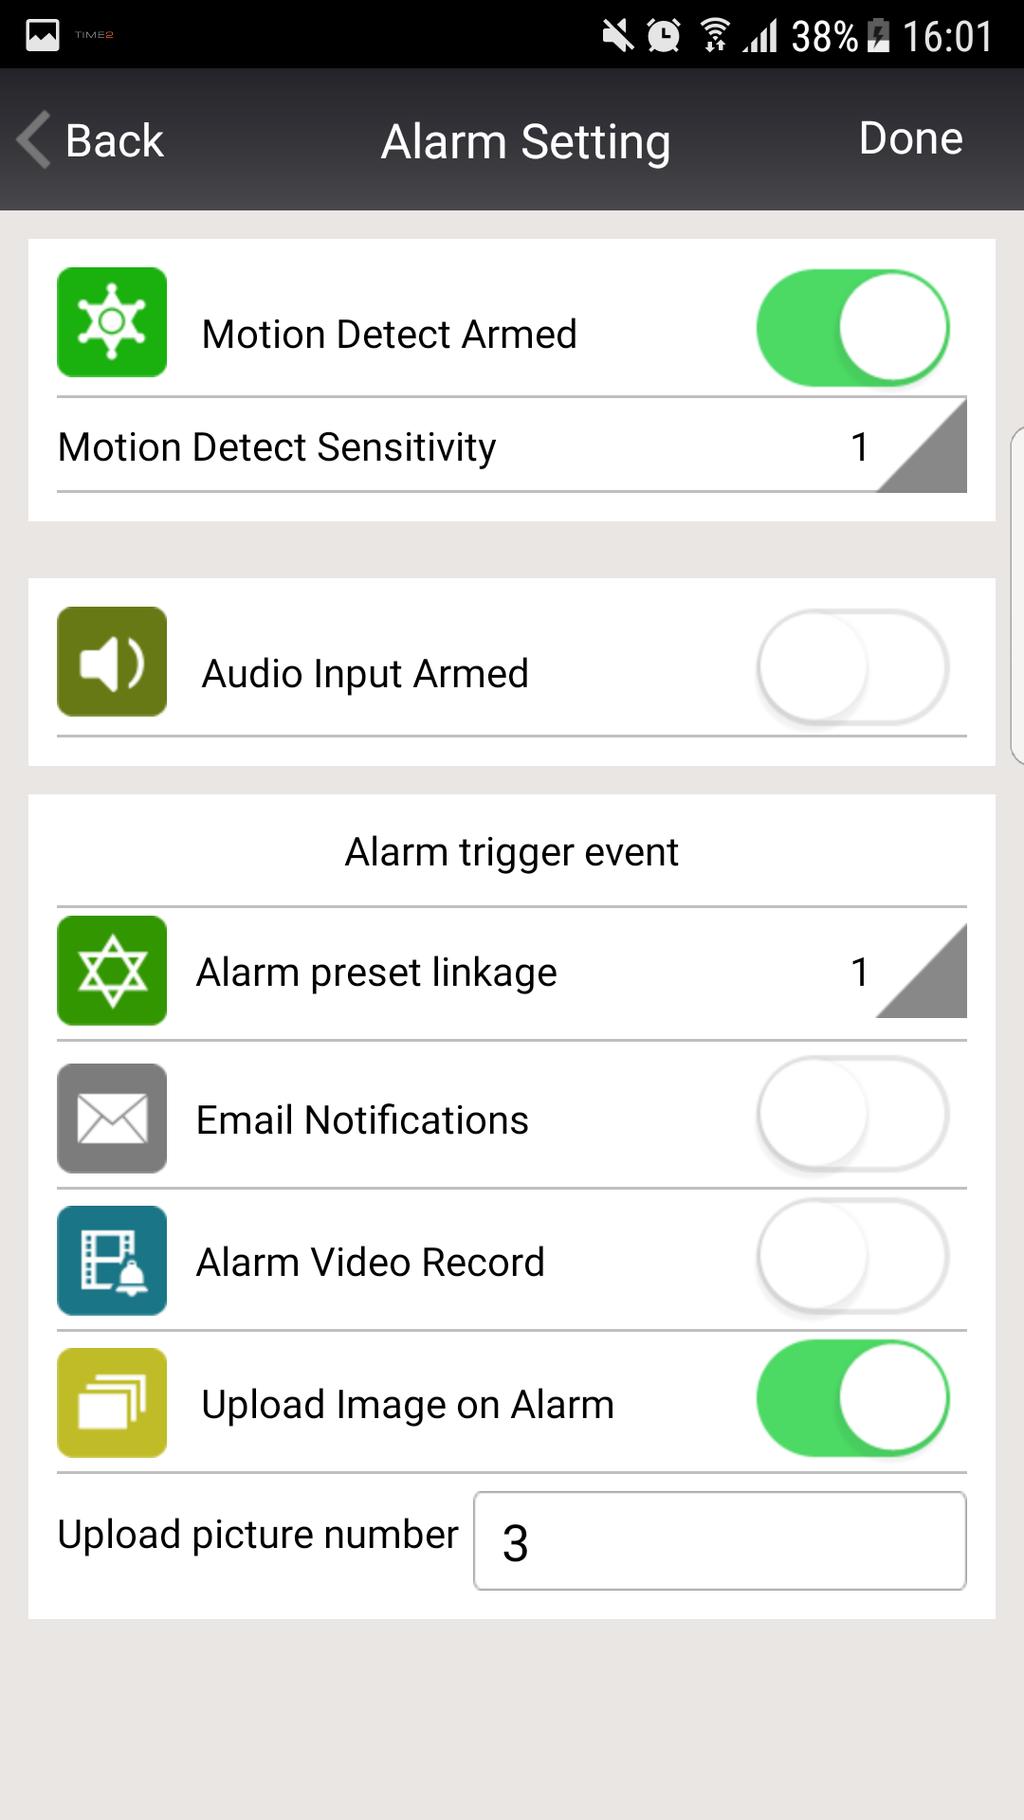 Alarm Setting Using this setting you can set the camera to send